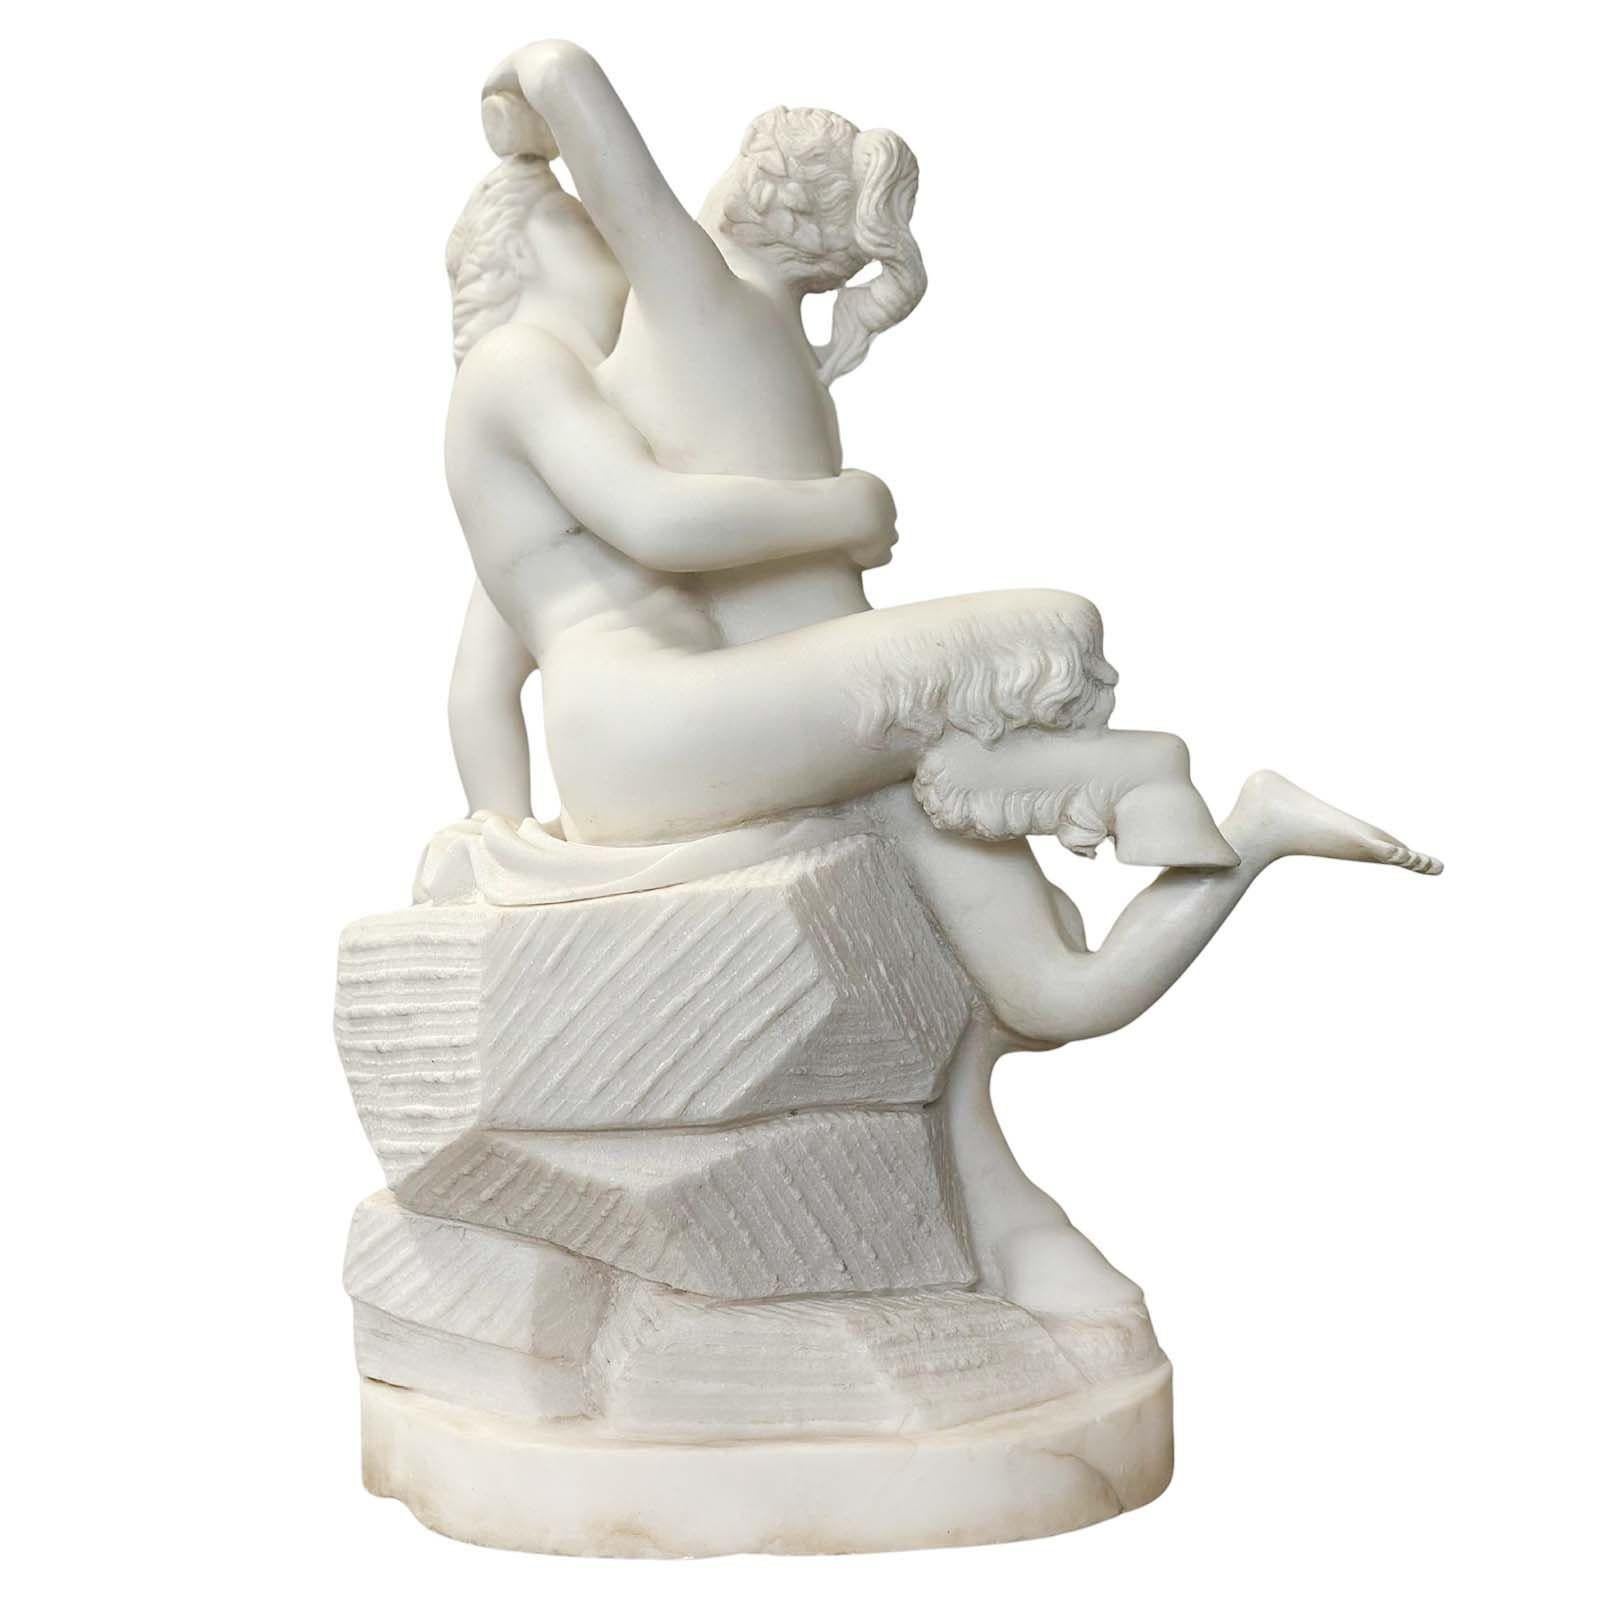 Alluring white marble sculpture made in Italy in the late 19th Century, depicting a beautiful nude woman giving water to a centaur, while he's holding her in his arms. They are sitting on rocks and the piece is supported by an oval